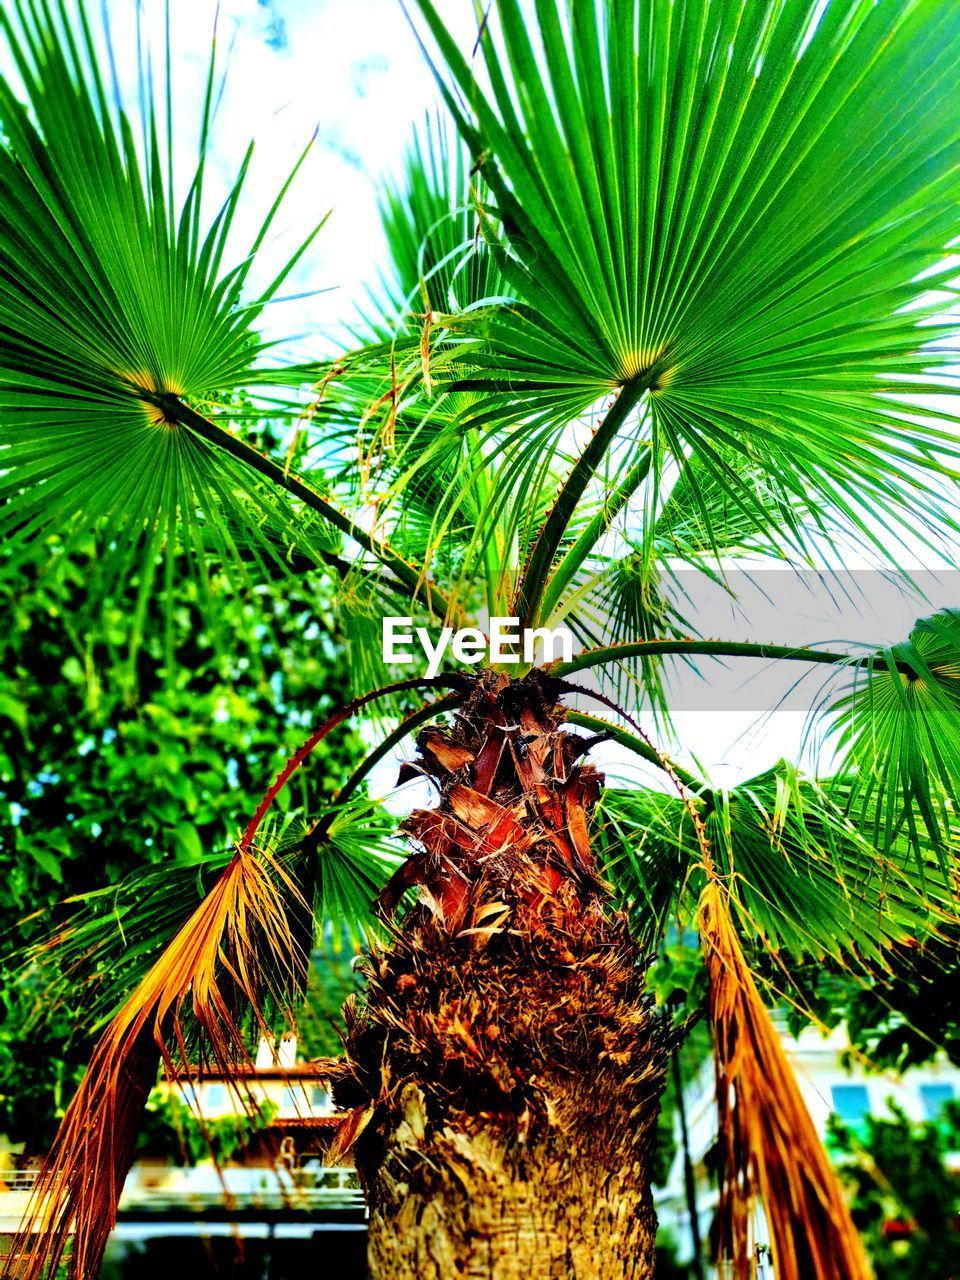 CLOSE-UP OF COCONUT PALM TREE WITH PLANTS